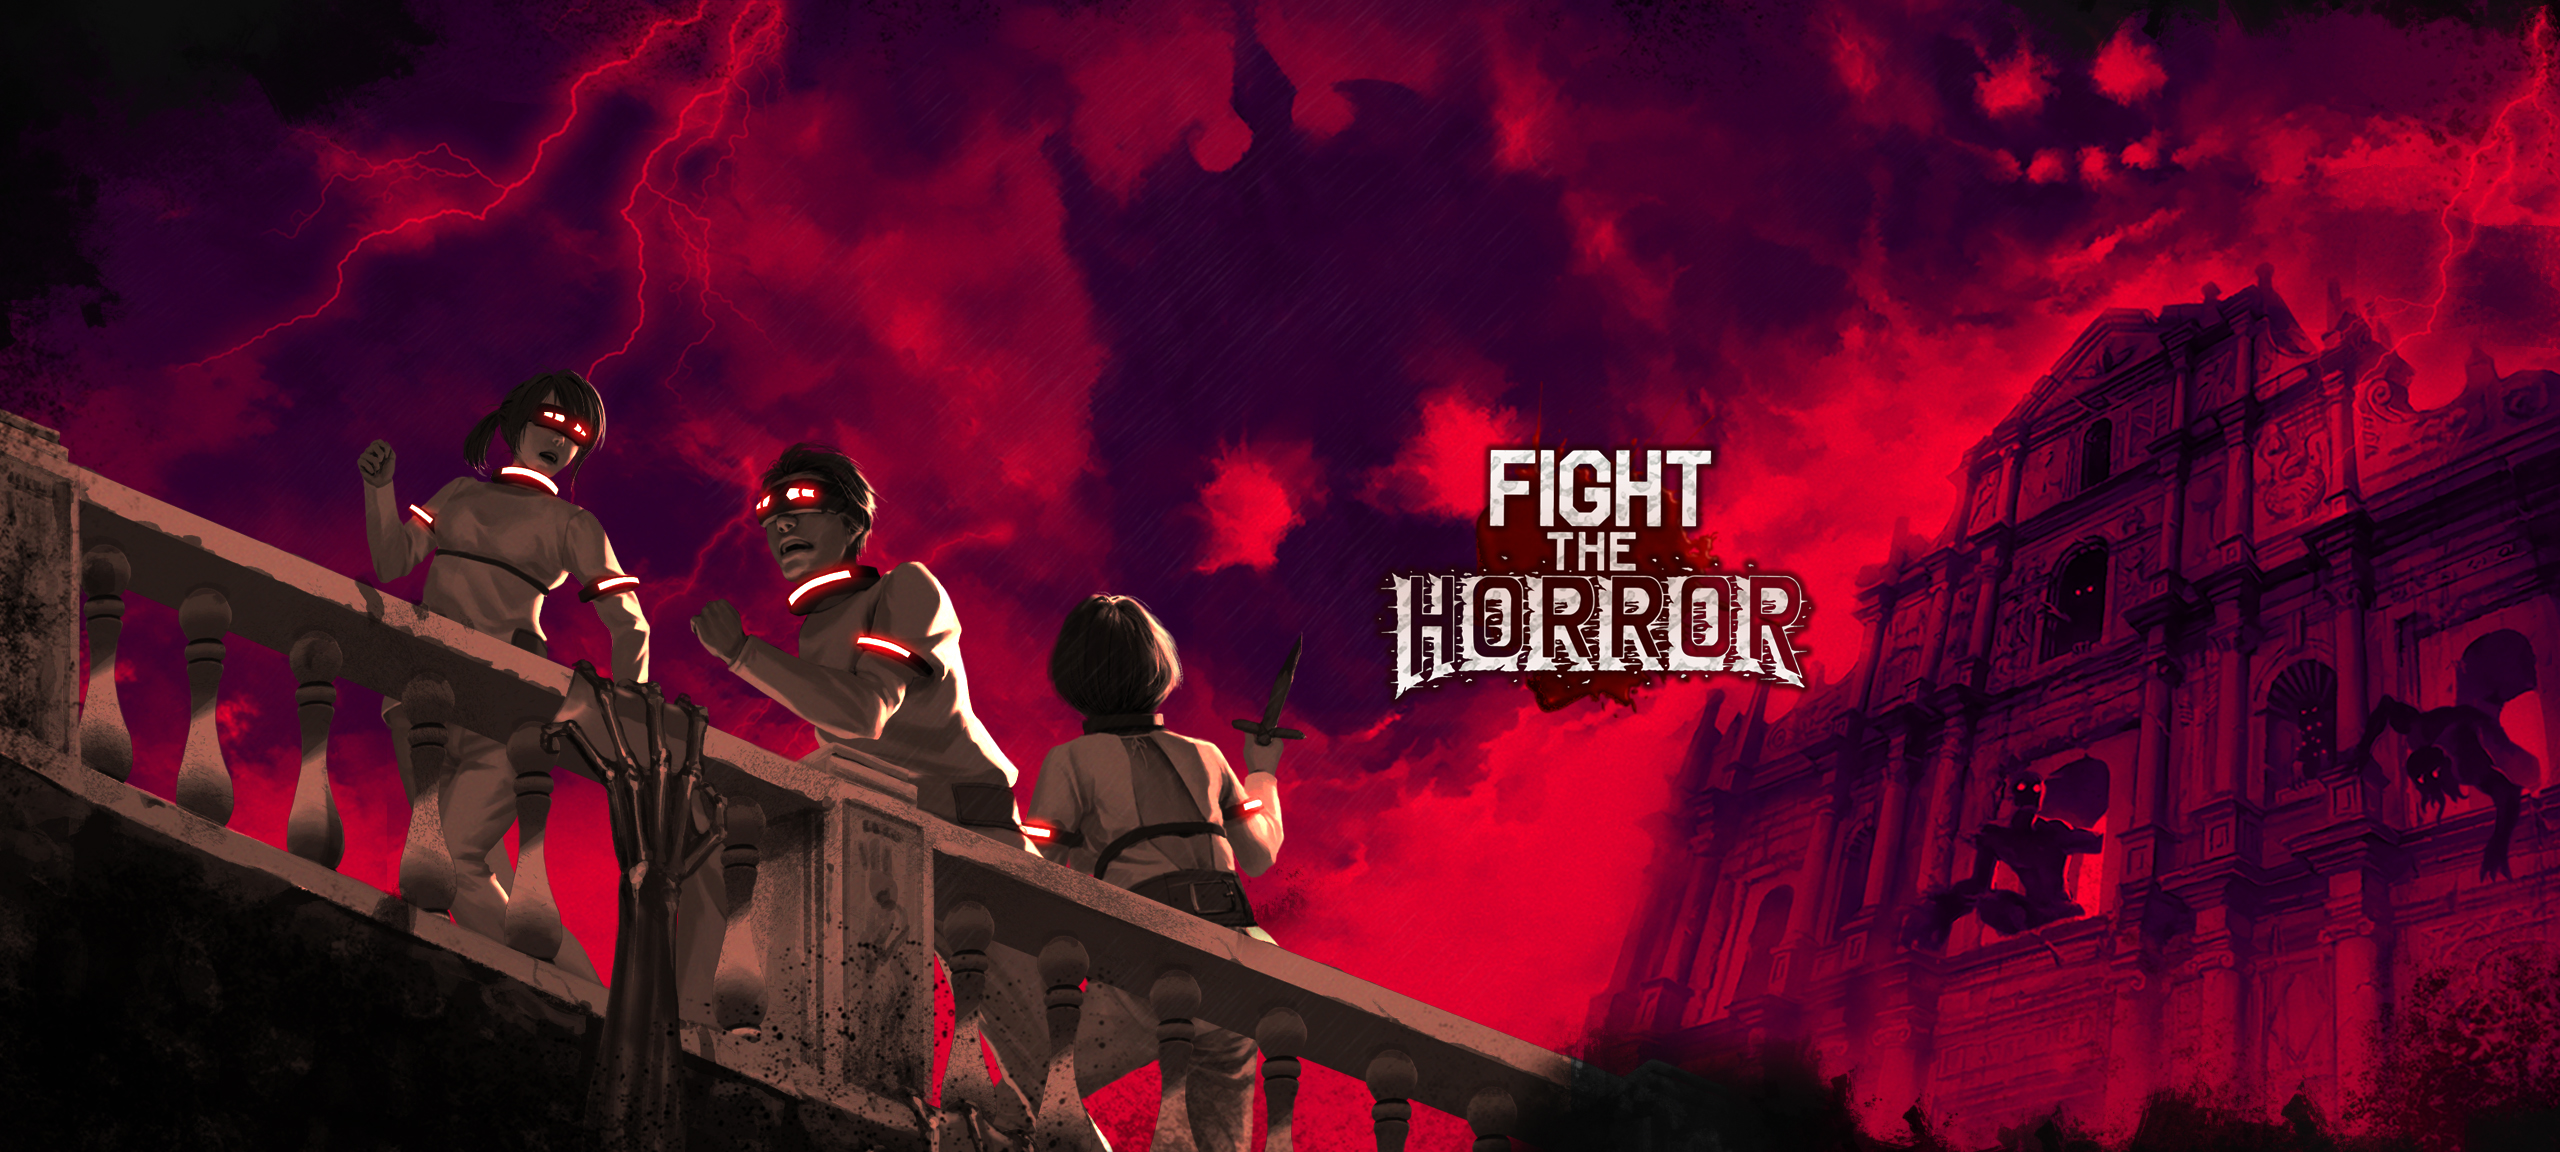 Fight the Horror 2122018 3